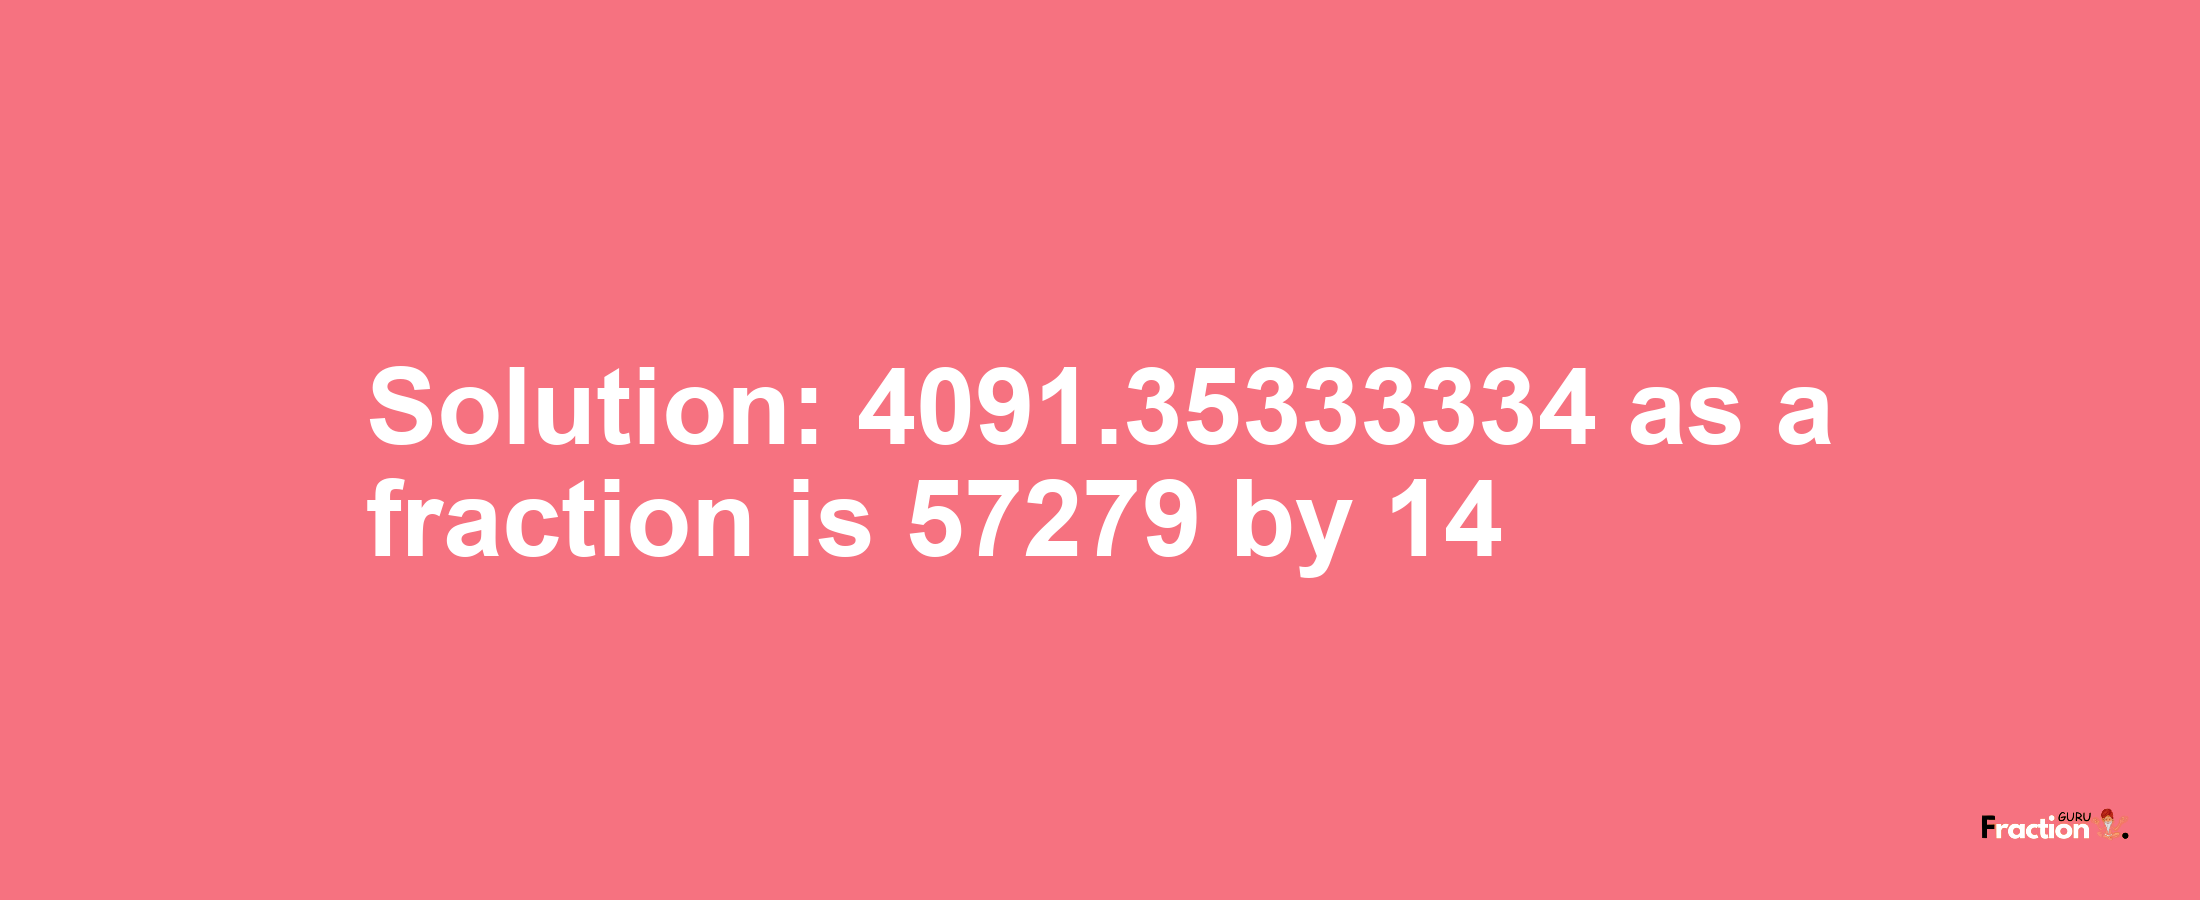 Solution:4091.35333334 as a fraction is 57279/14